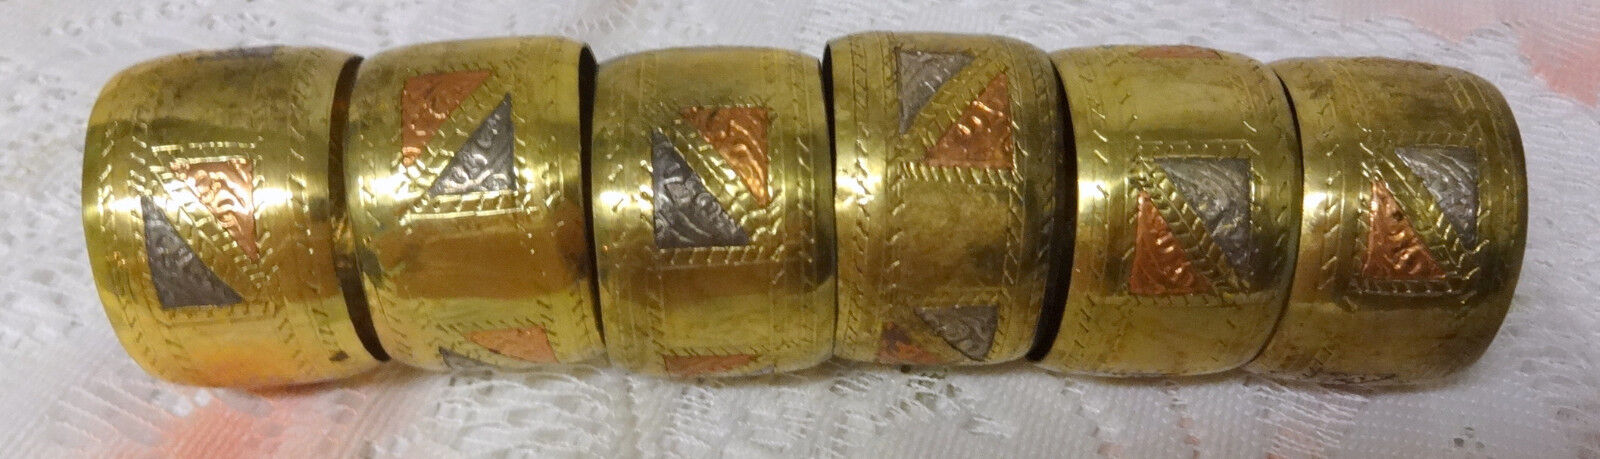 Vintage Cappor Brass Modernist Art Napkin Rings for Dinners Parties Set of 6 pc